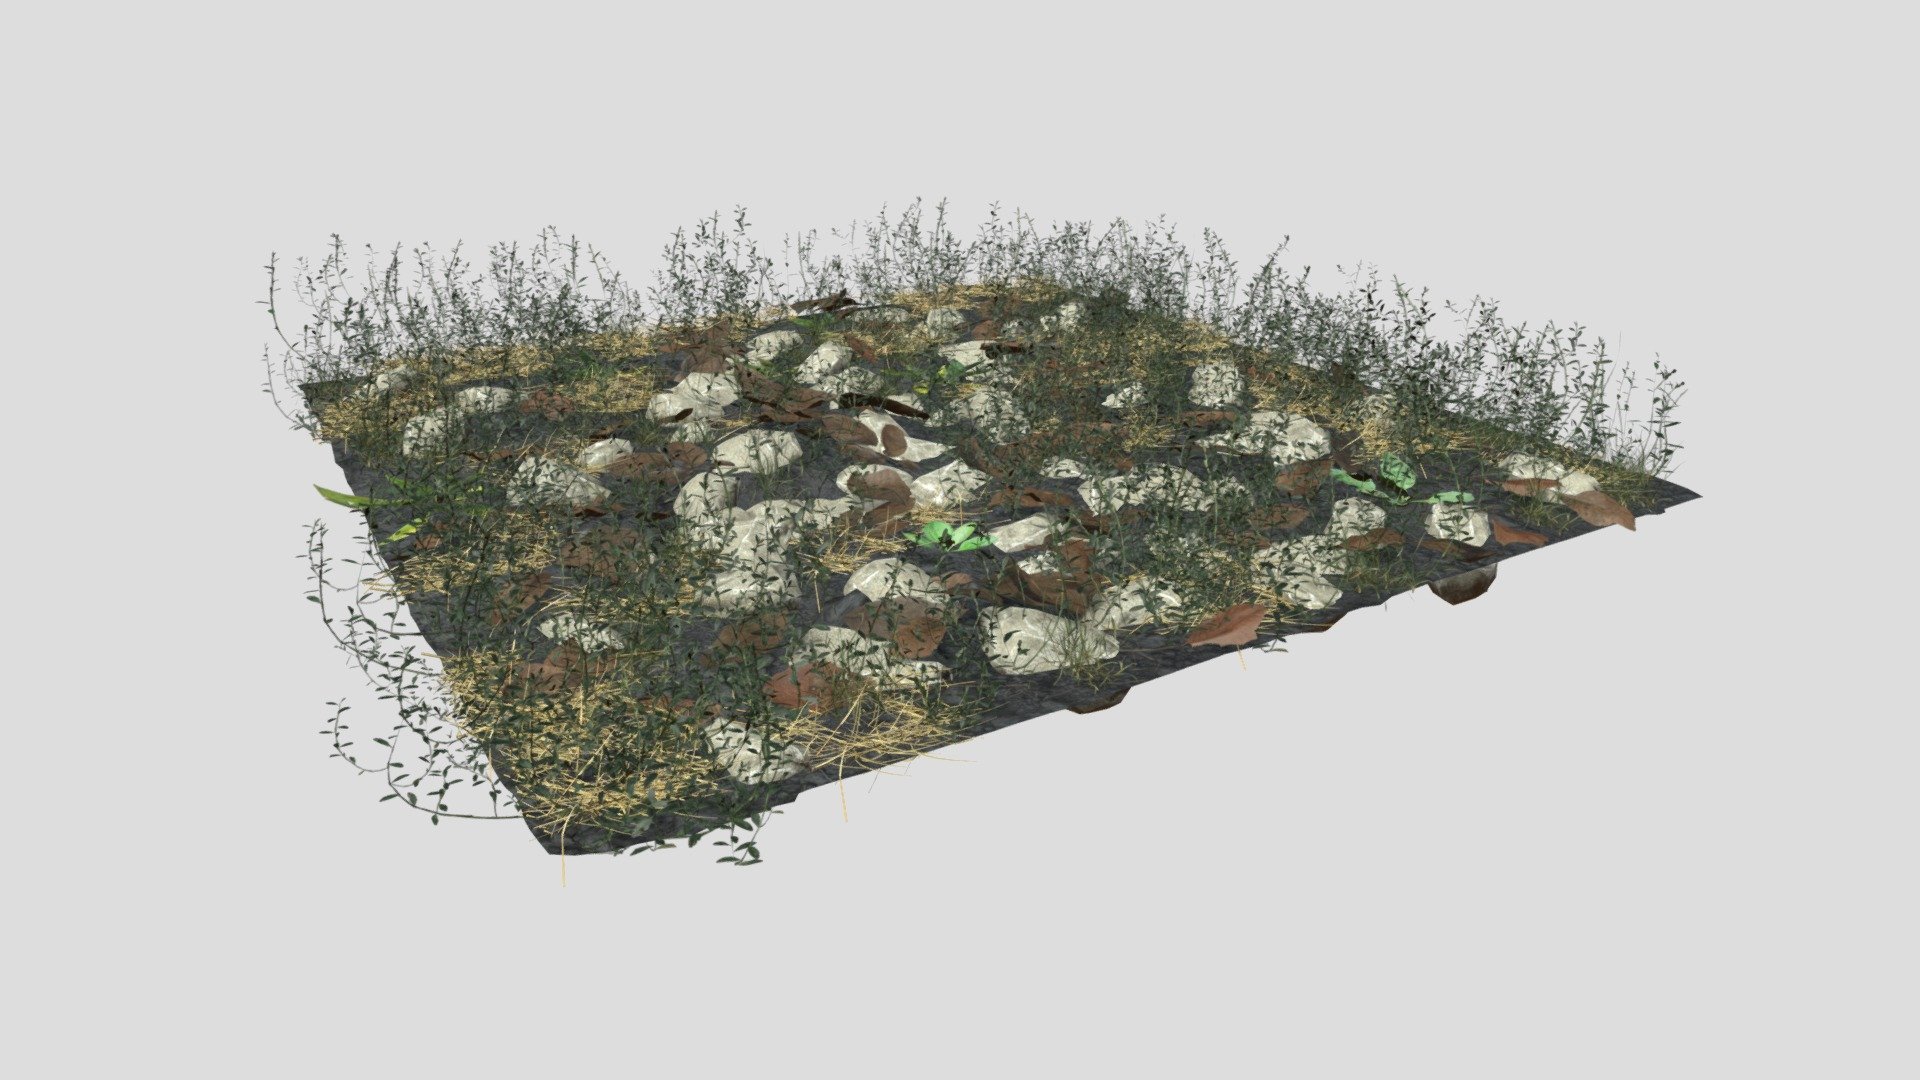 Hi all,

This is PBR knotweed meadow patch created in Blender in real world scale (100cm x 100cm). It includes 8 different models:

soil (3D scanned)

knotweed

dry walnut leaves

narrow leaf plantain

dry grass

plantain

perennial ryegrass

rocks

It comes in following formats:

.blend

.fbx

.obj

.dae

The blender file has the shaders set up, so it's ready to render using Cycles. The title image is not included.

Each model comes with set of 4K .png maps:

base color

roughness

normal

opacity

translucency

ambient occlusion - Knotweed Meadow Patch - Buy Royalty Free 3D model by kambur 3d model